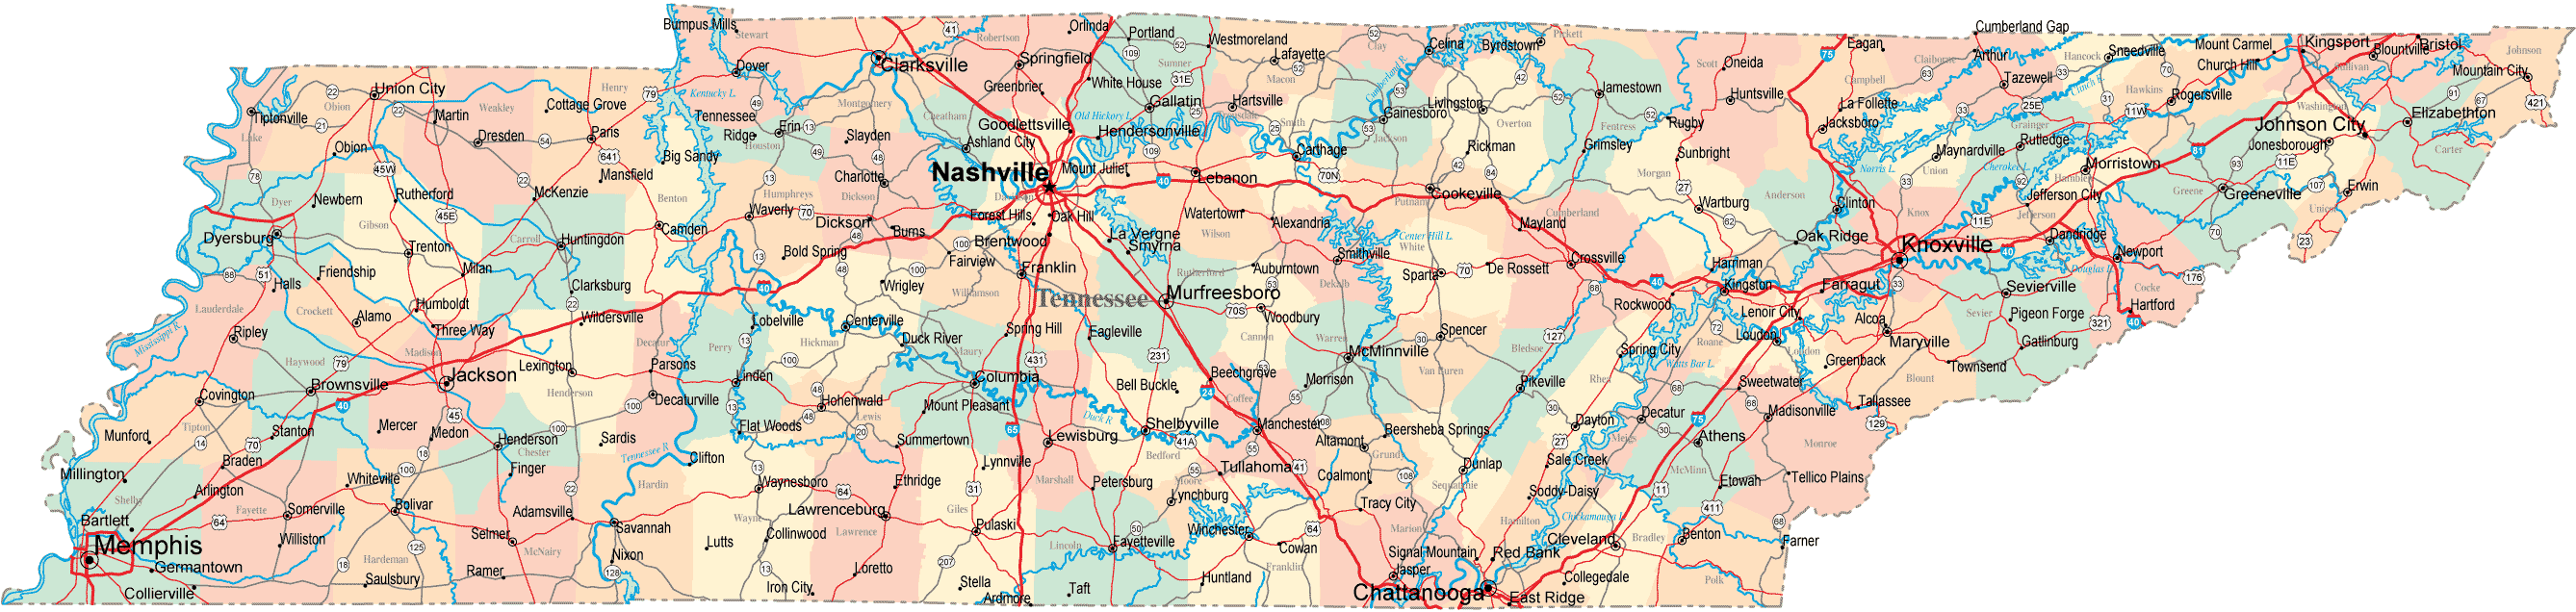 map of tennessee mannerism